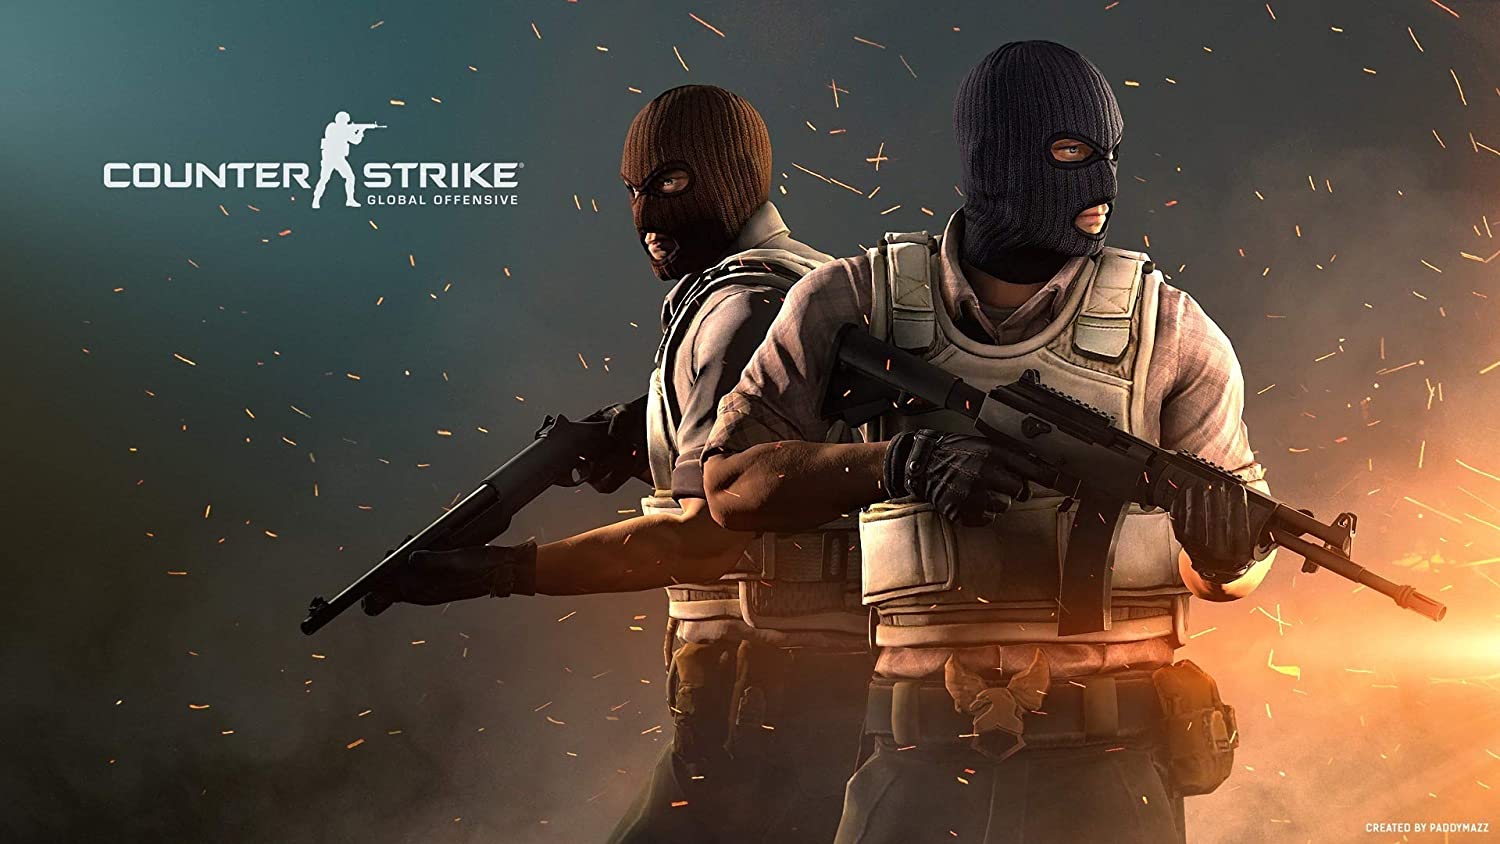 Learn How to Get Free CS:GO Skins